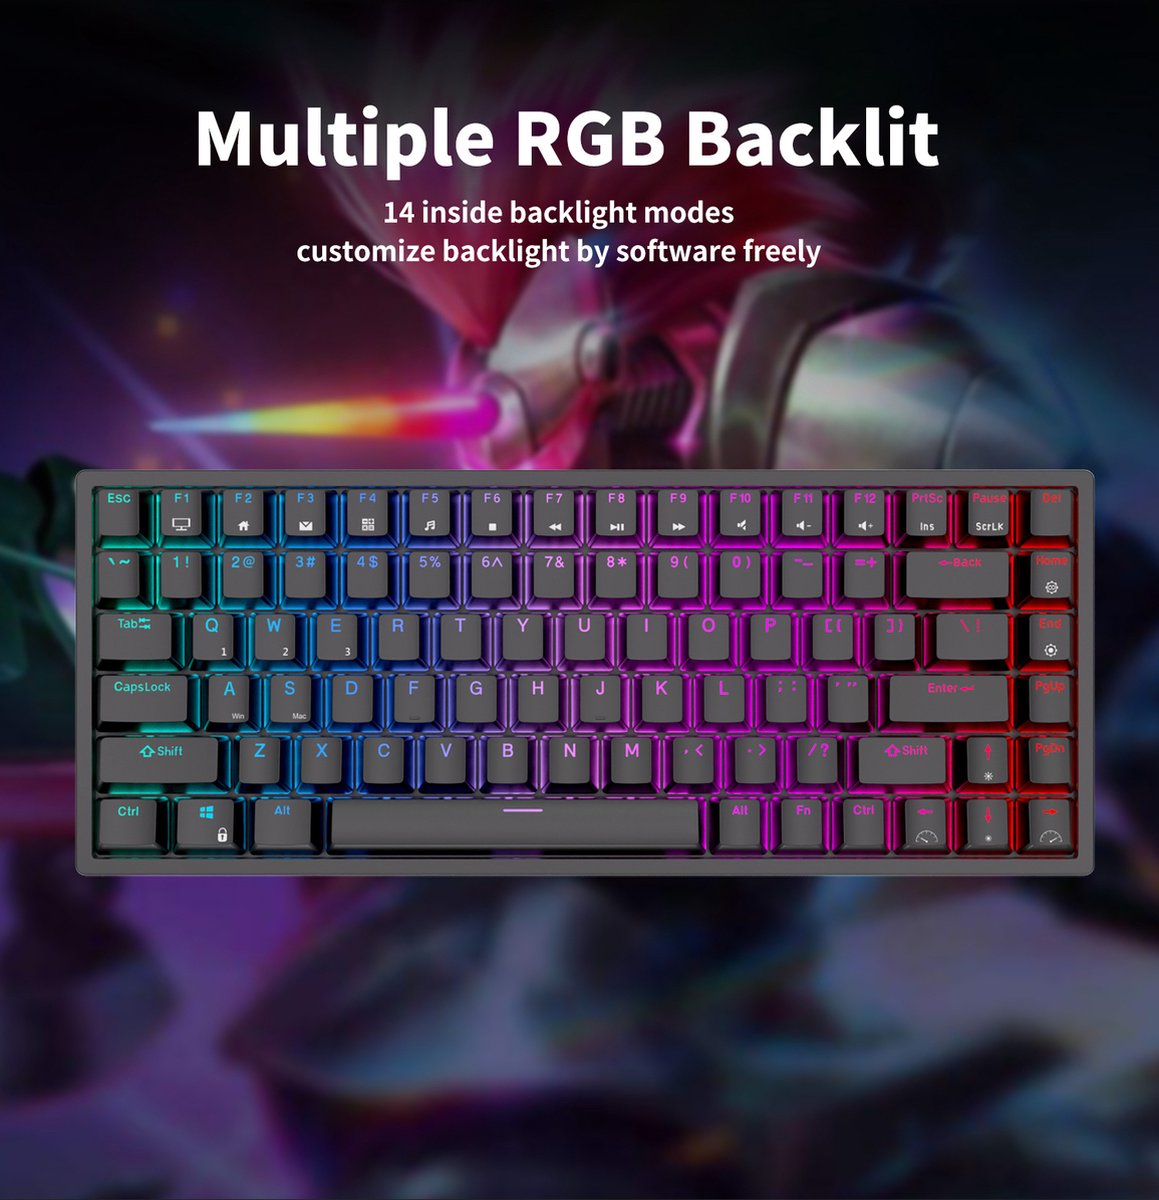 Clavier Gaming RK84 Wit - Siècle des Lumières RGB - Hot-Swappable - Tri-  Mode -... | bol.com